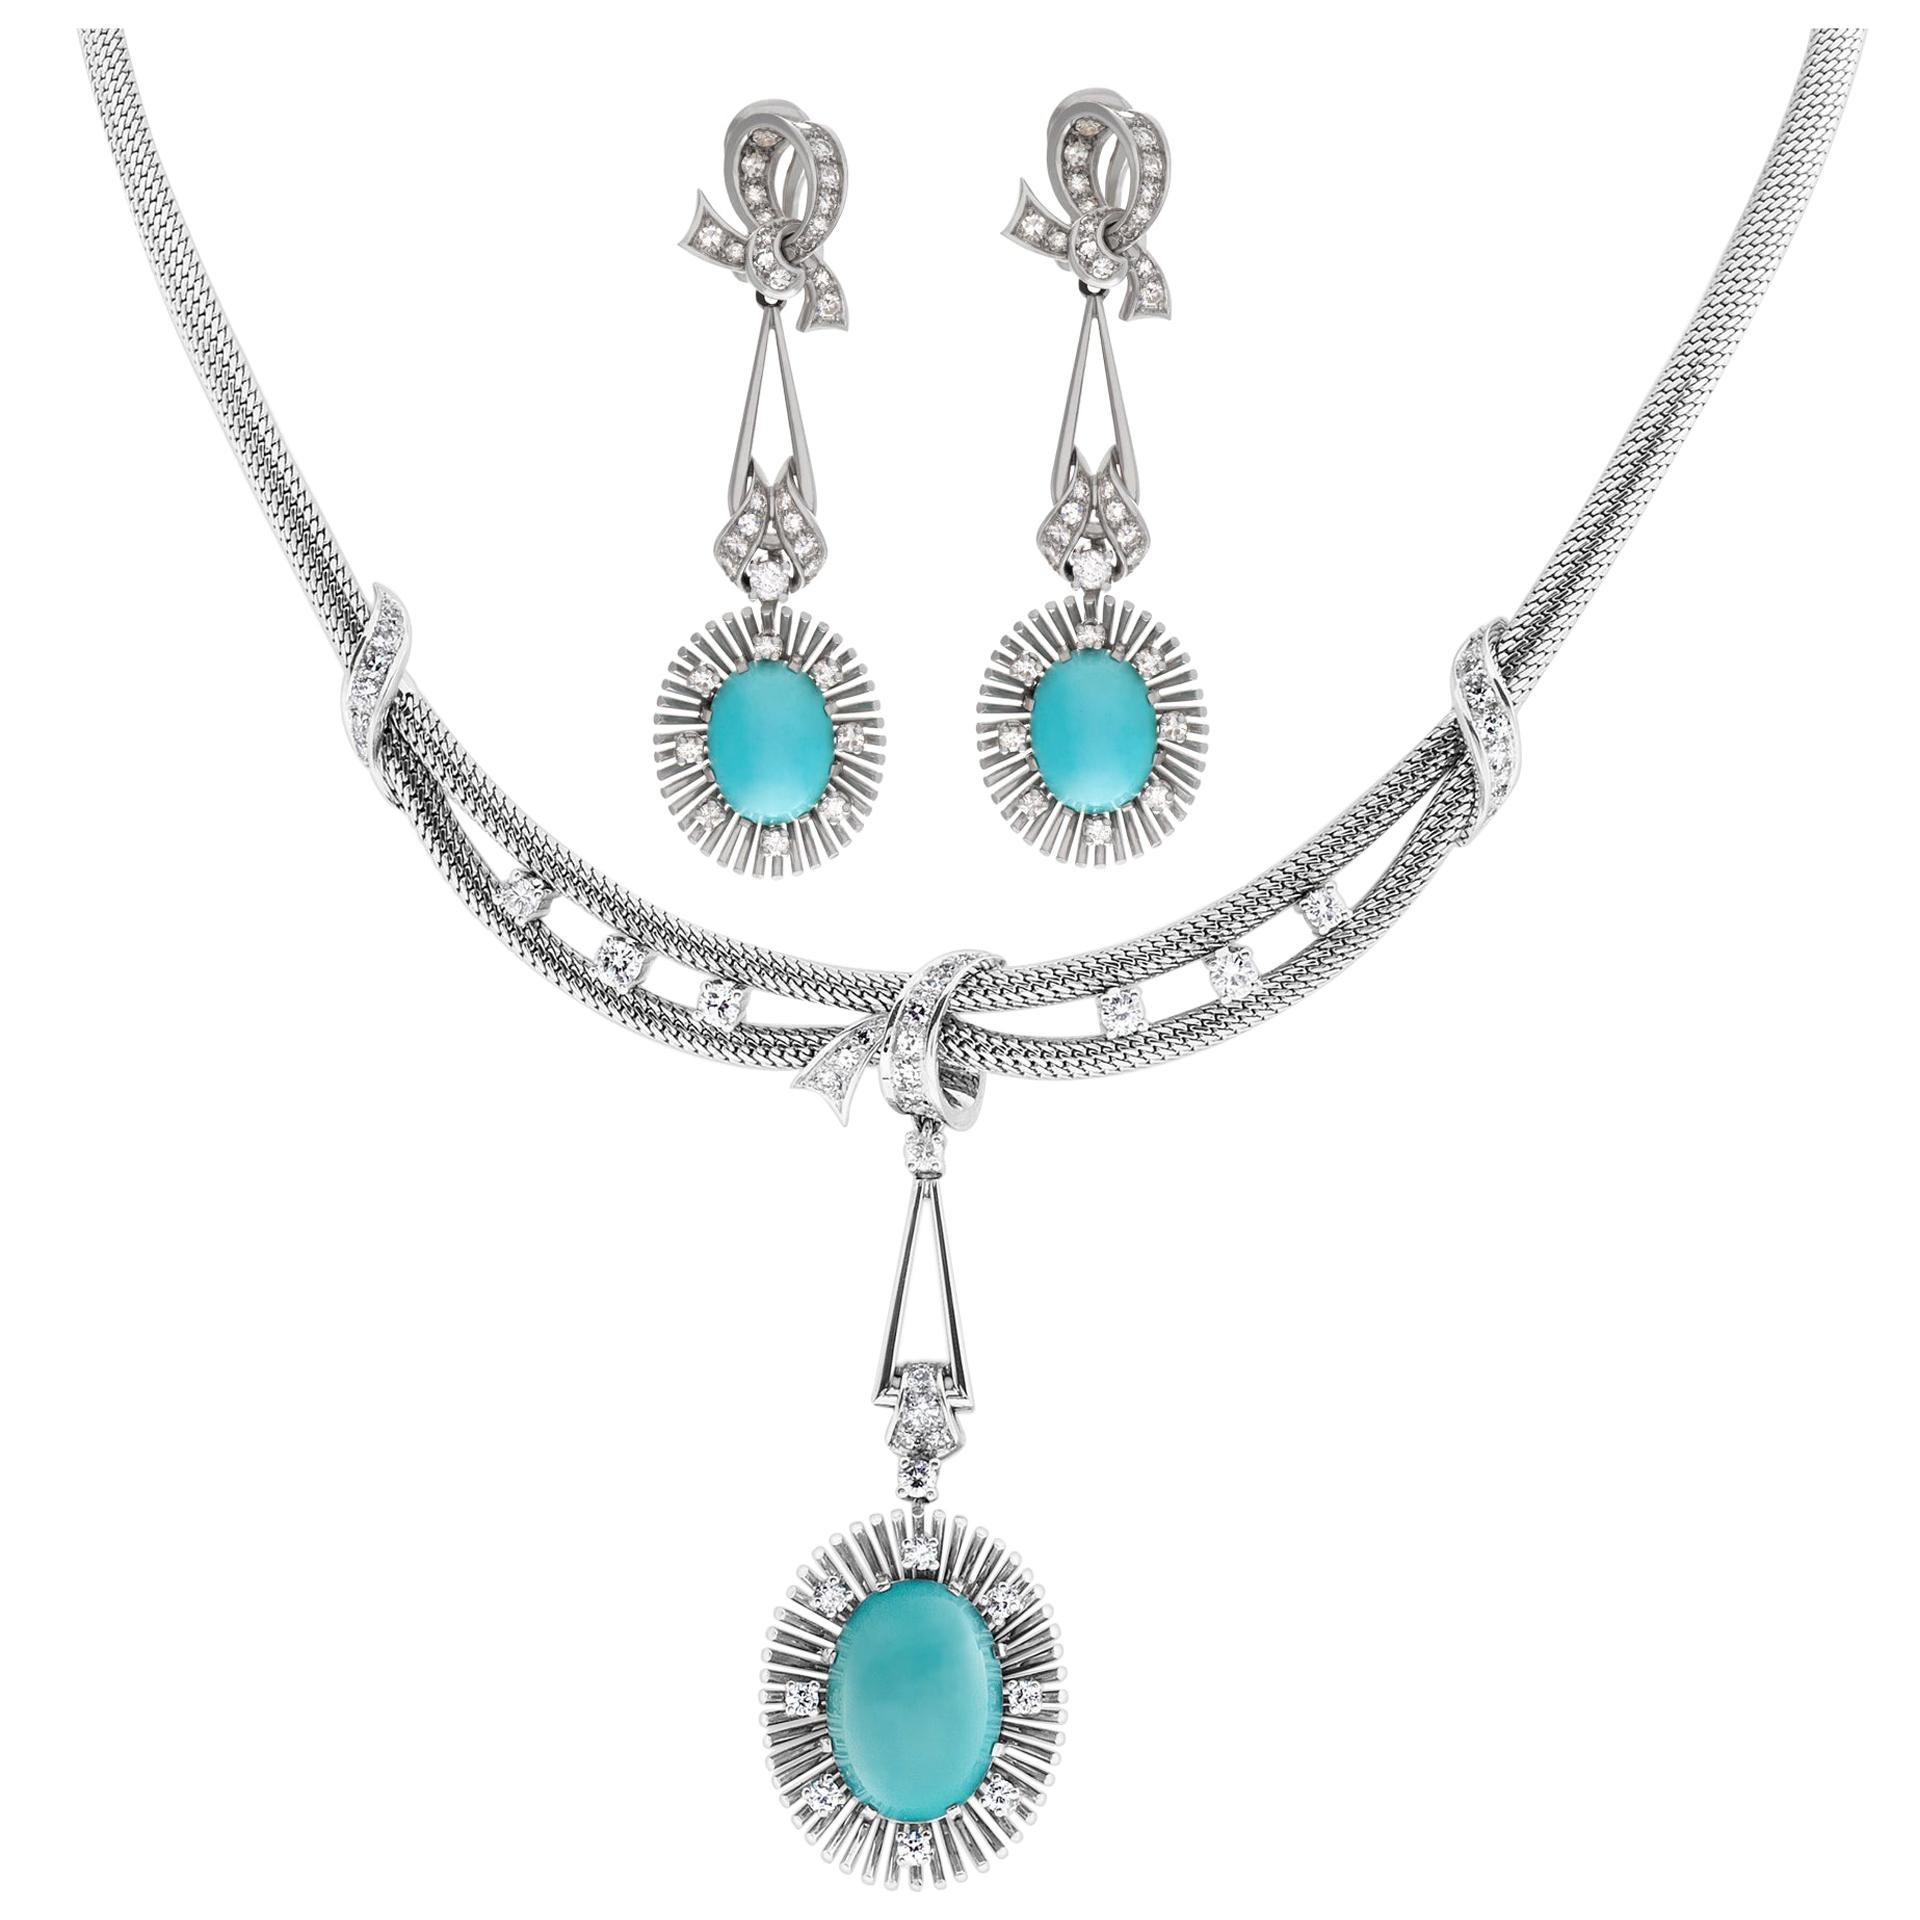 Turquoise and Diamond Necklace and Earrings Set in 18 Karat White Gold